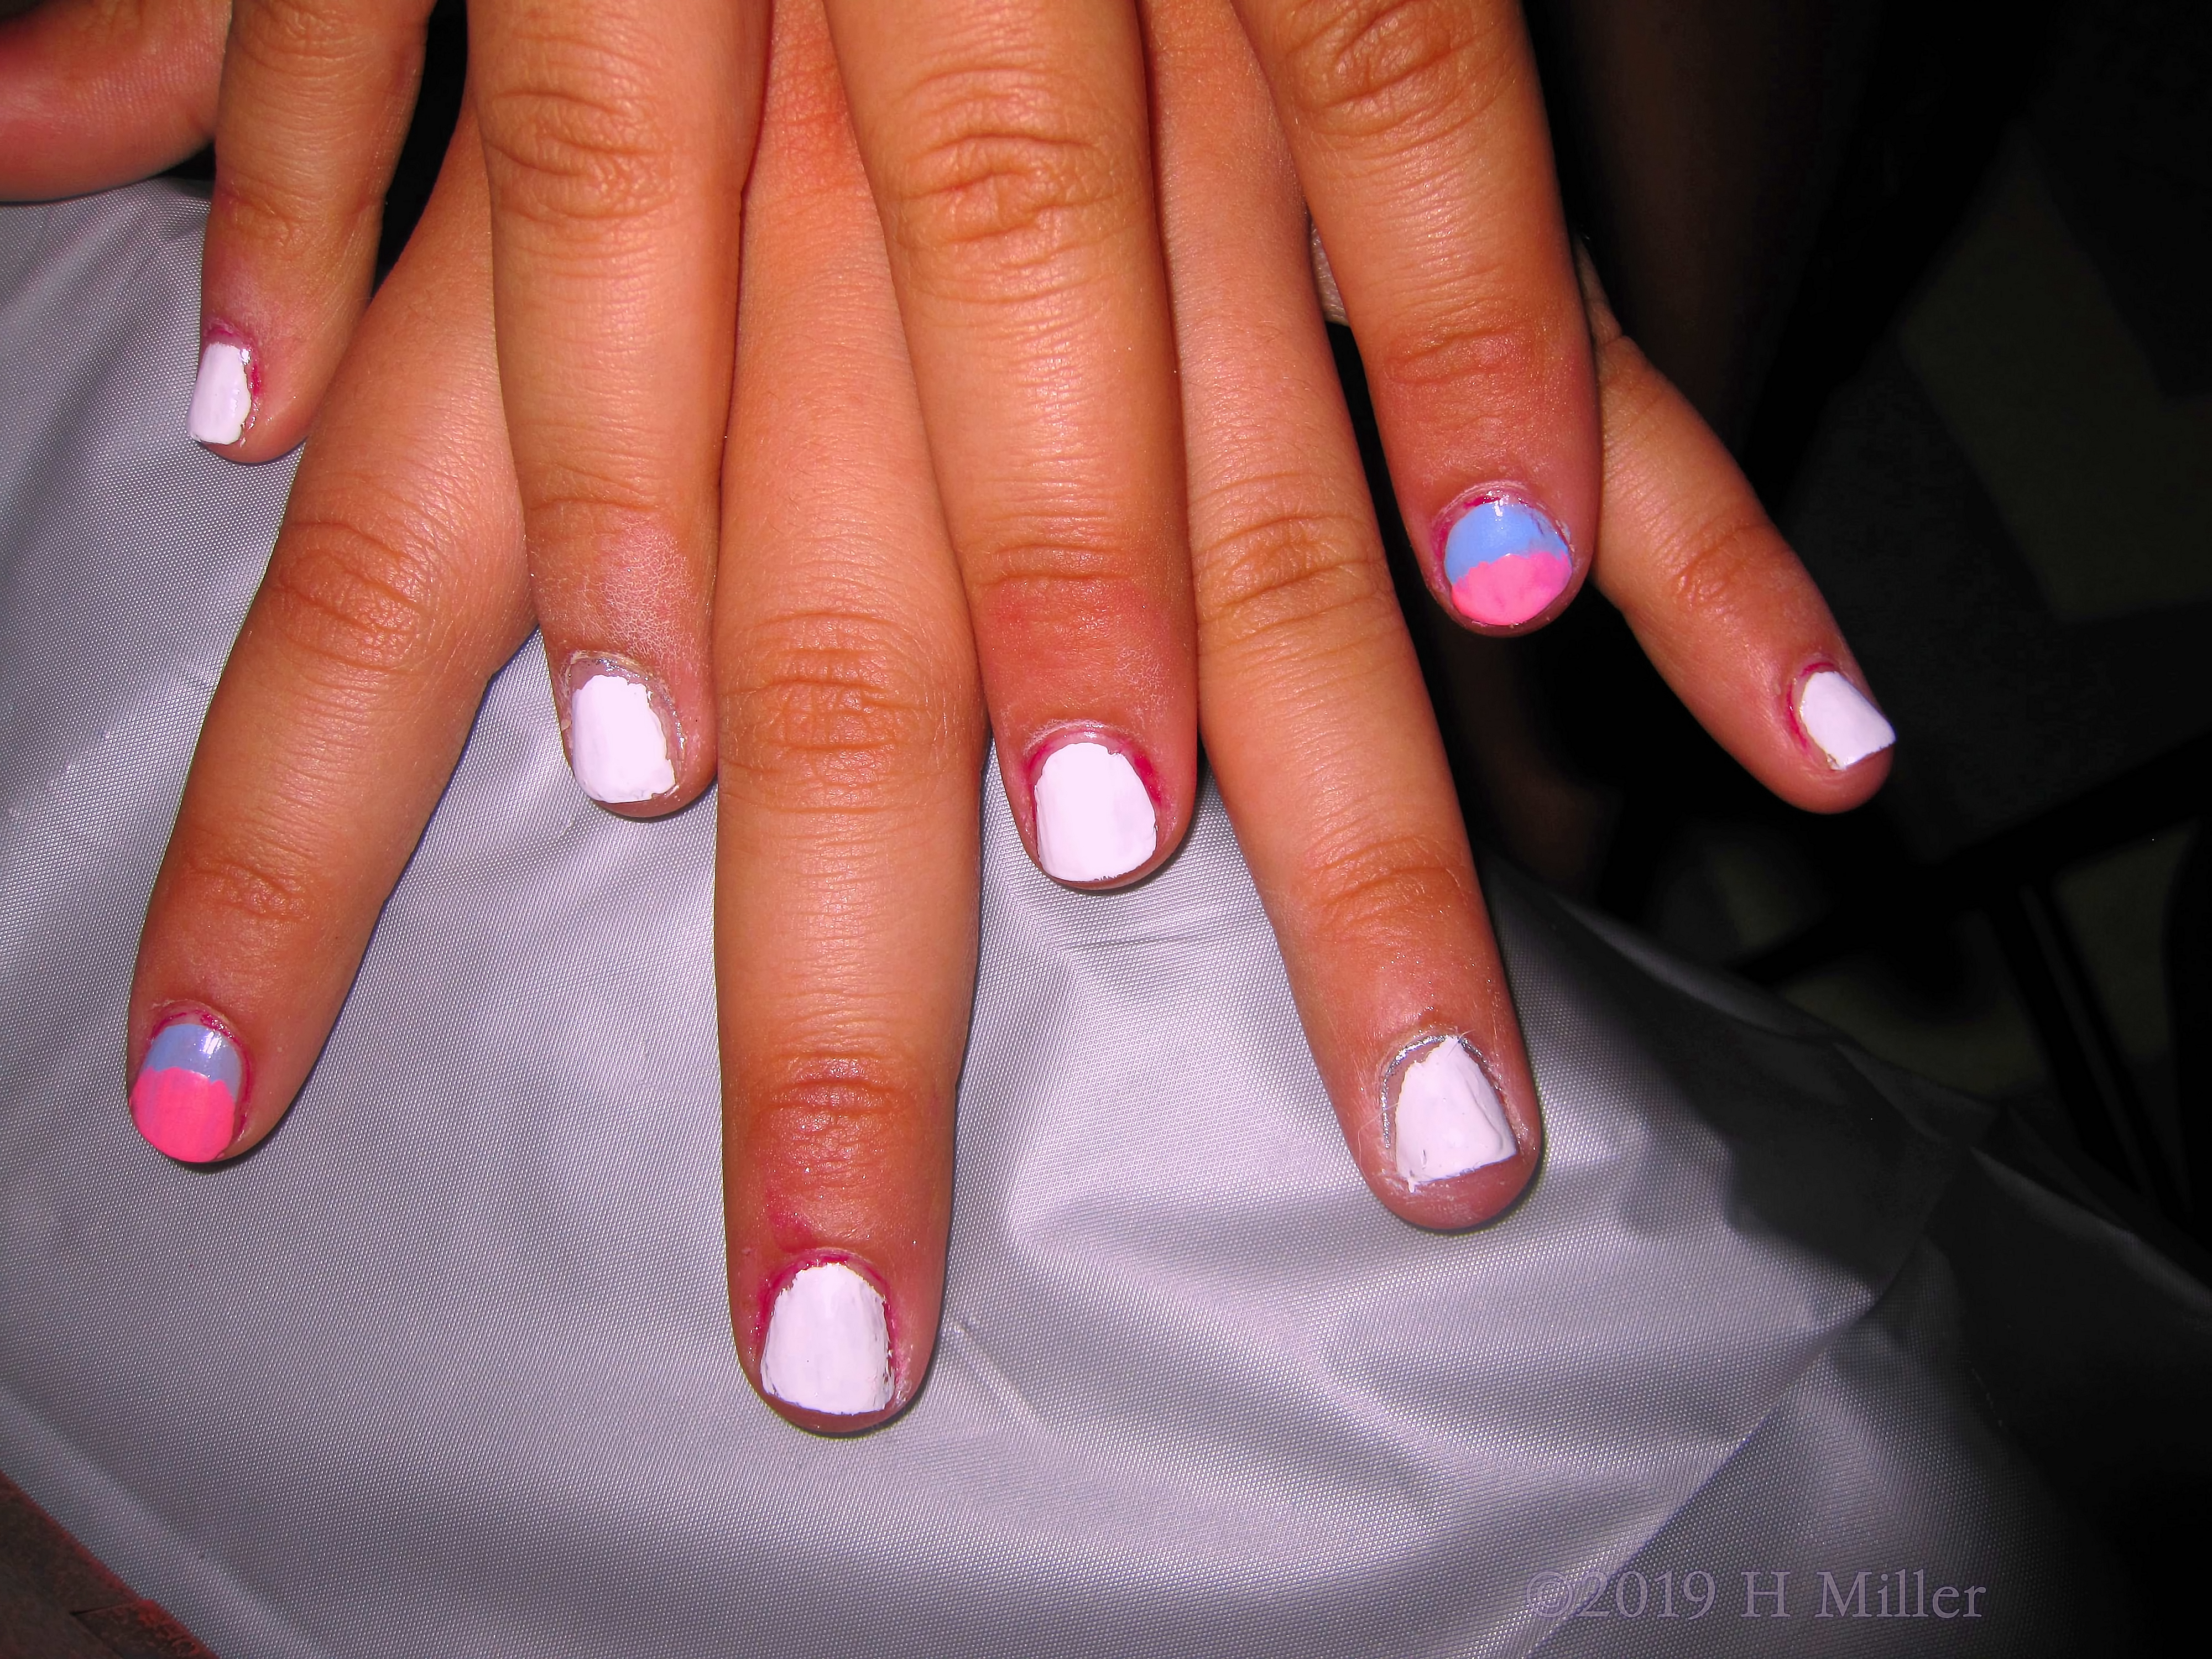 A Pretty Manicure For Girls With Nail Design Of Pink And  Blue Ombre.